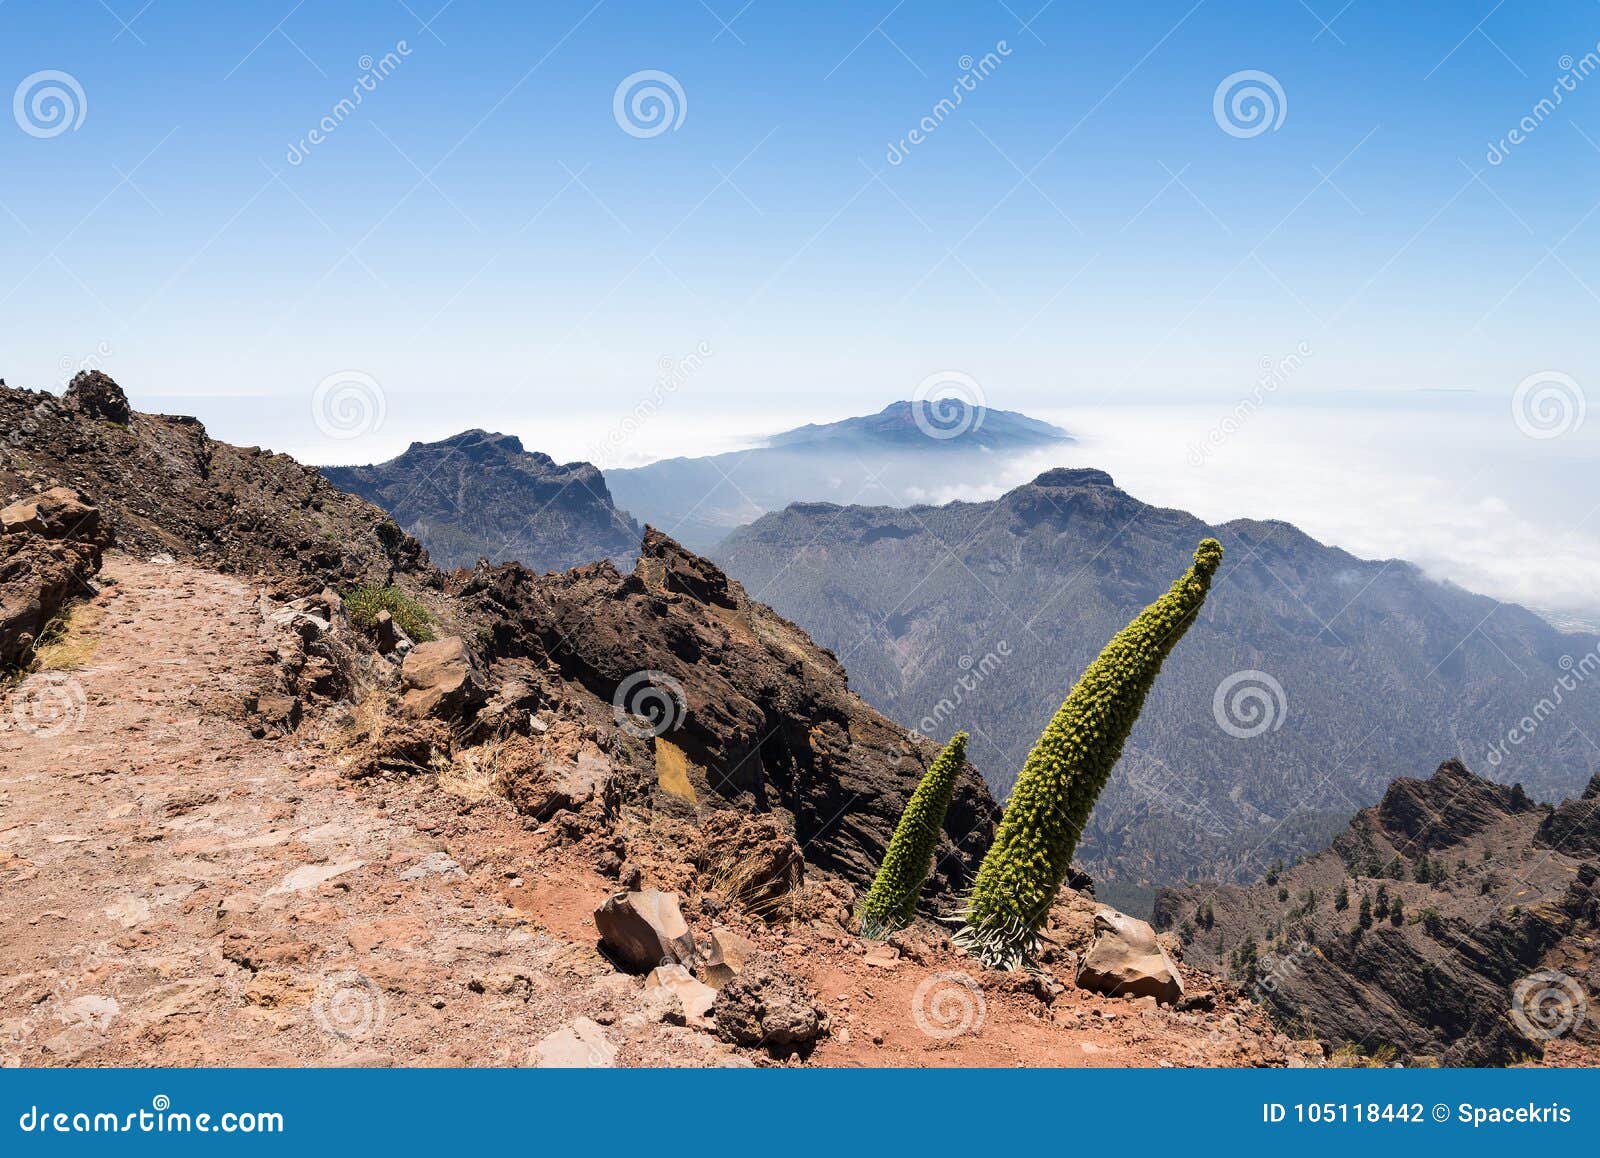 hiking path on the roque de los muchachos at the island of la palma